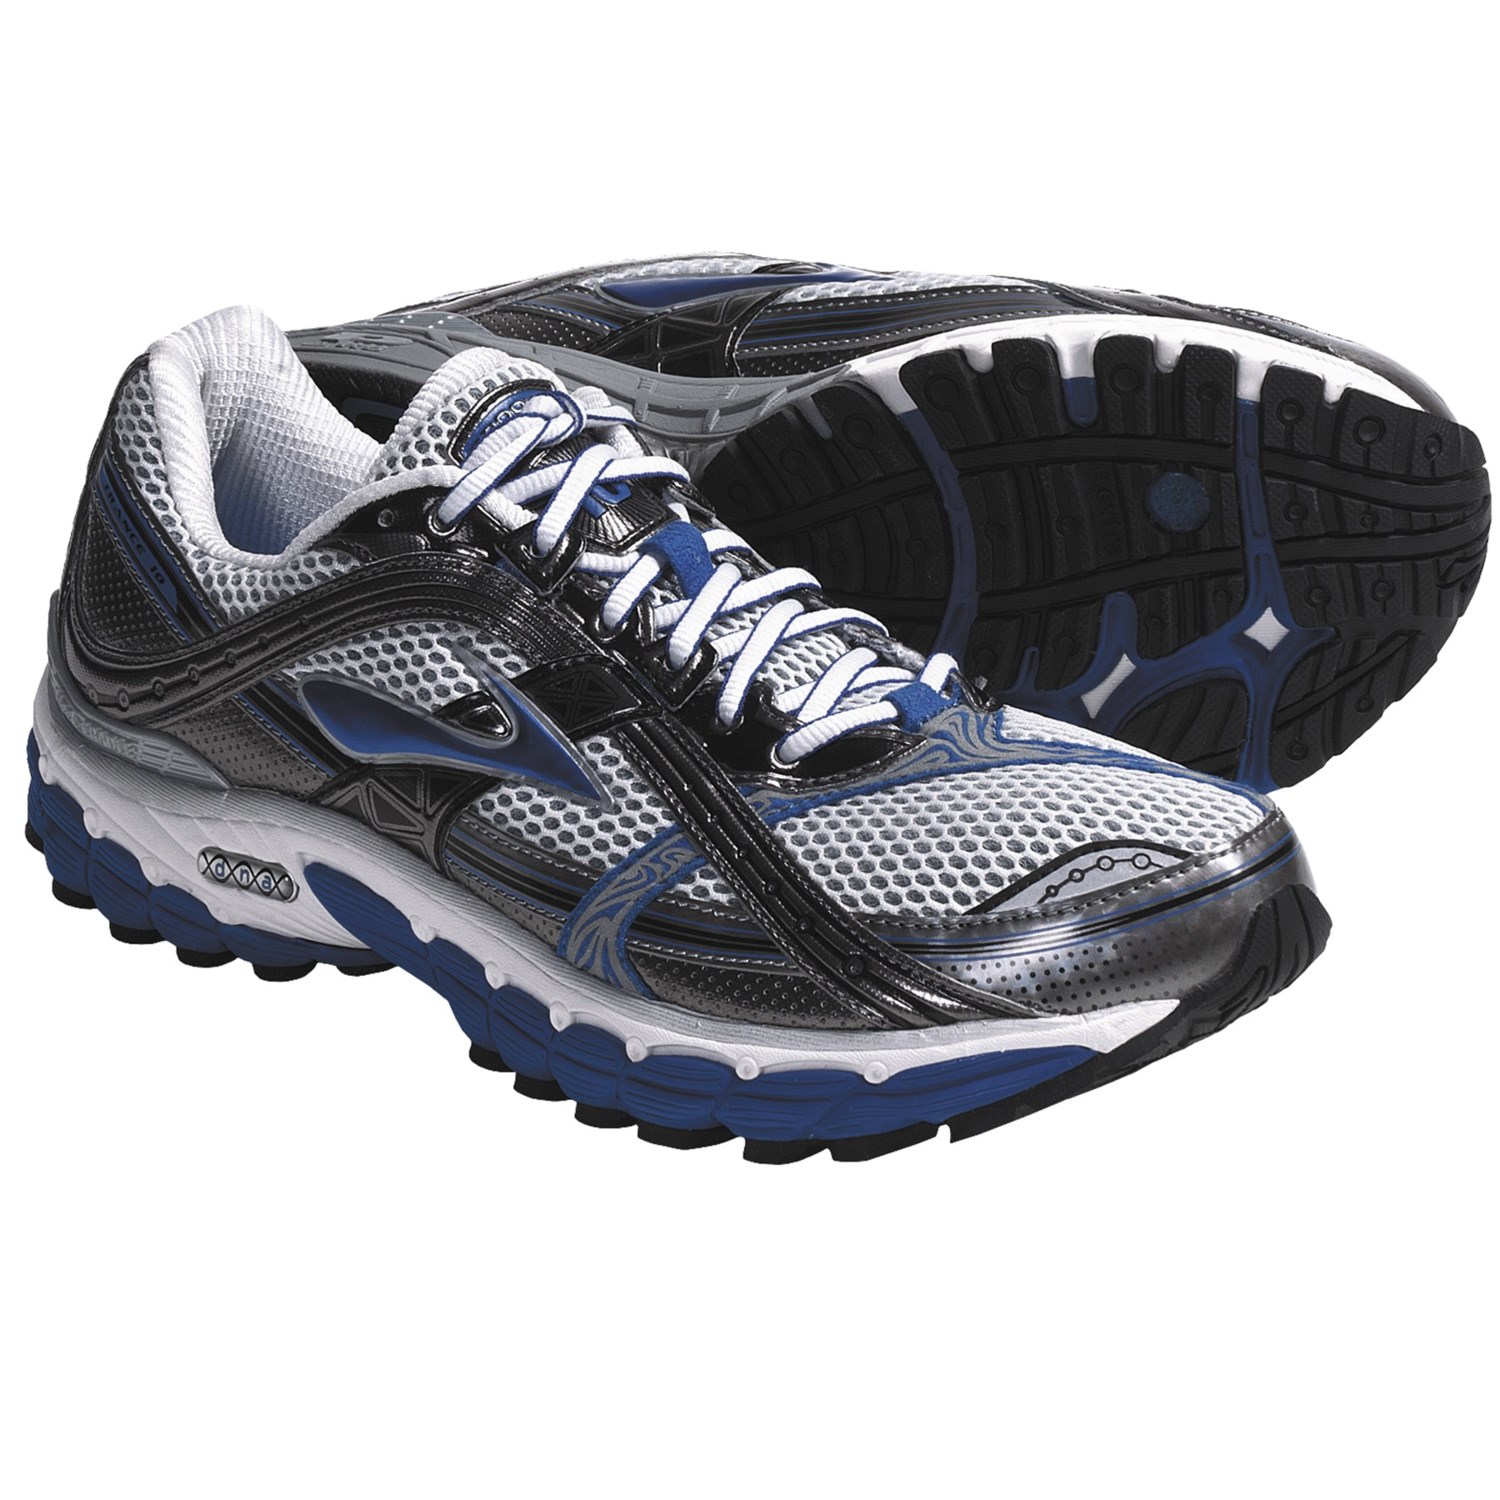 Navy/Metallic for (For Trance Brooks  Shoes running  Men)  Running Bright 10 in shoes